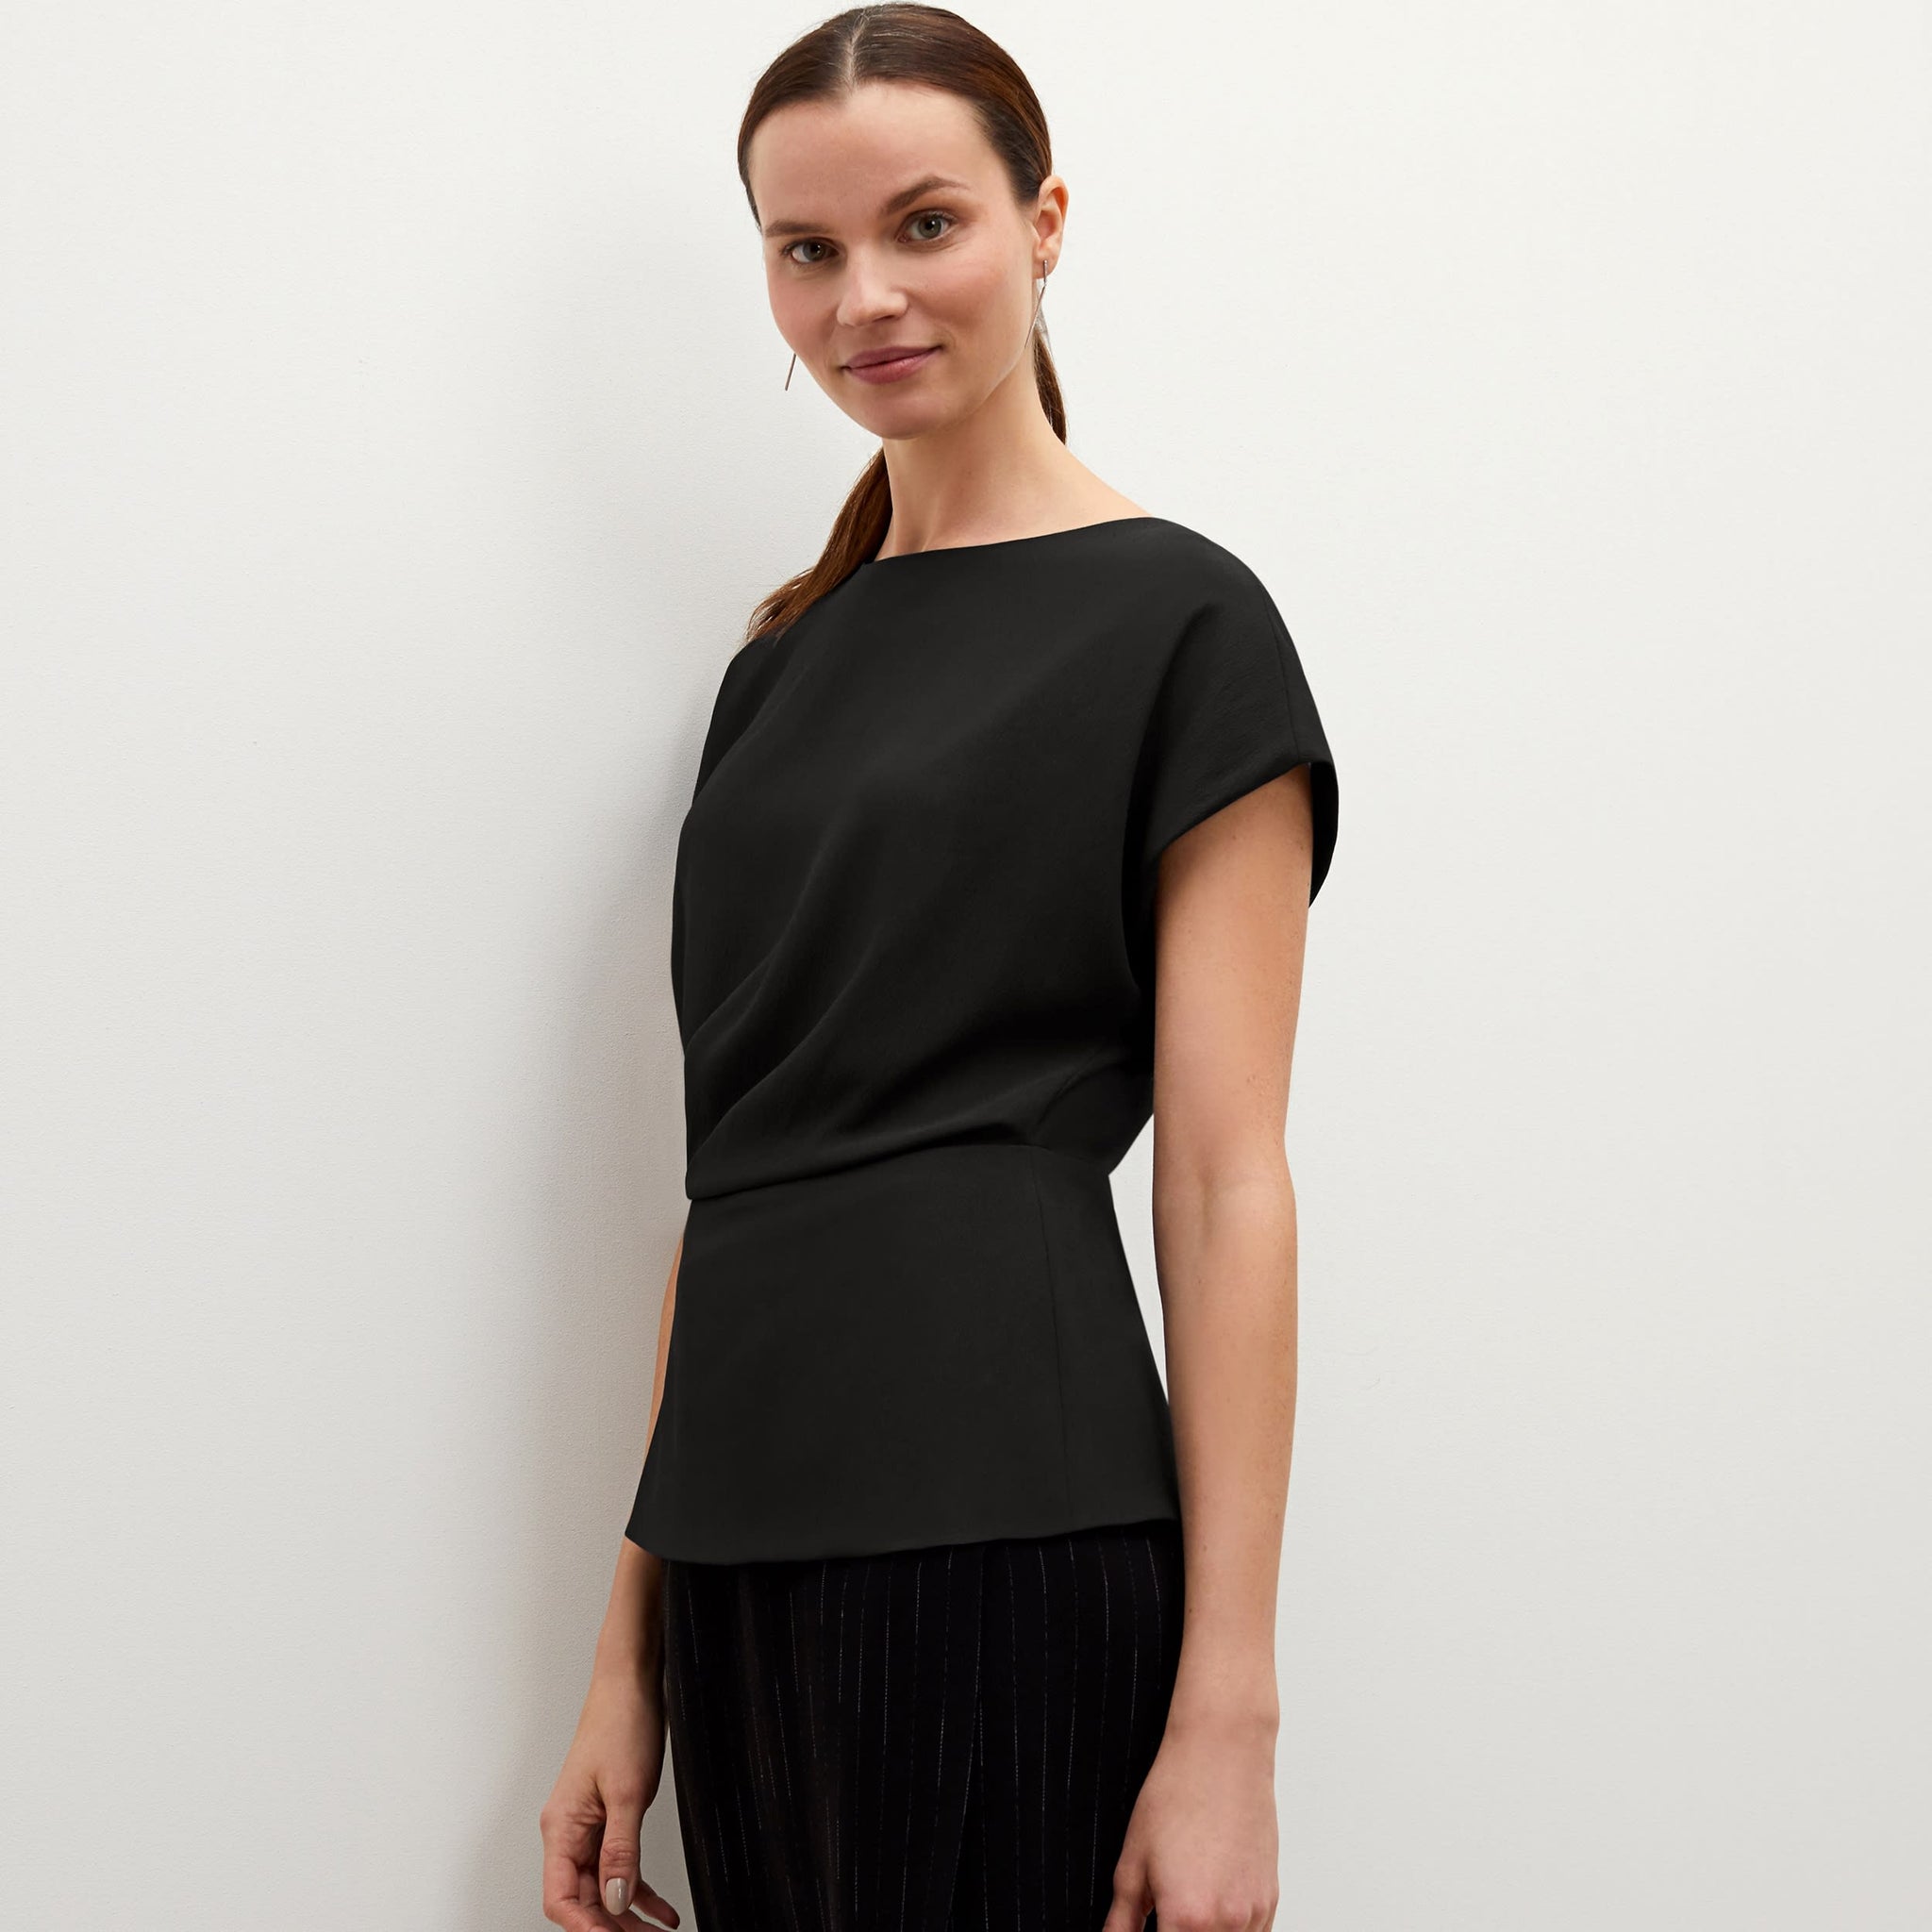 Front image of a woman standing wearing the Nejvi top in black